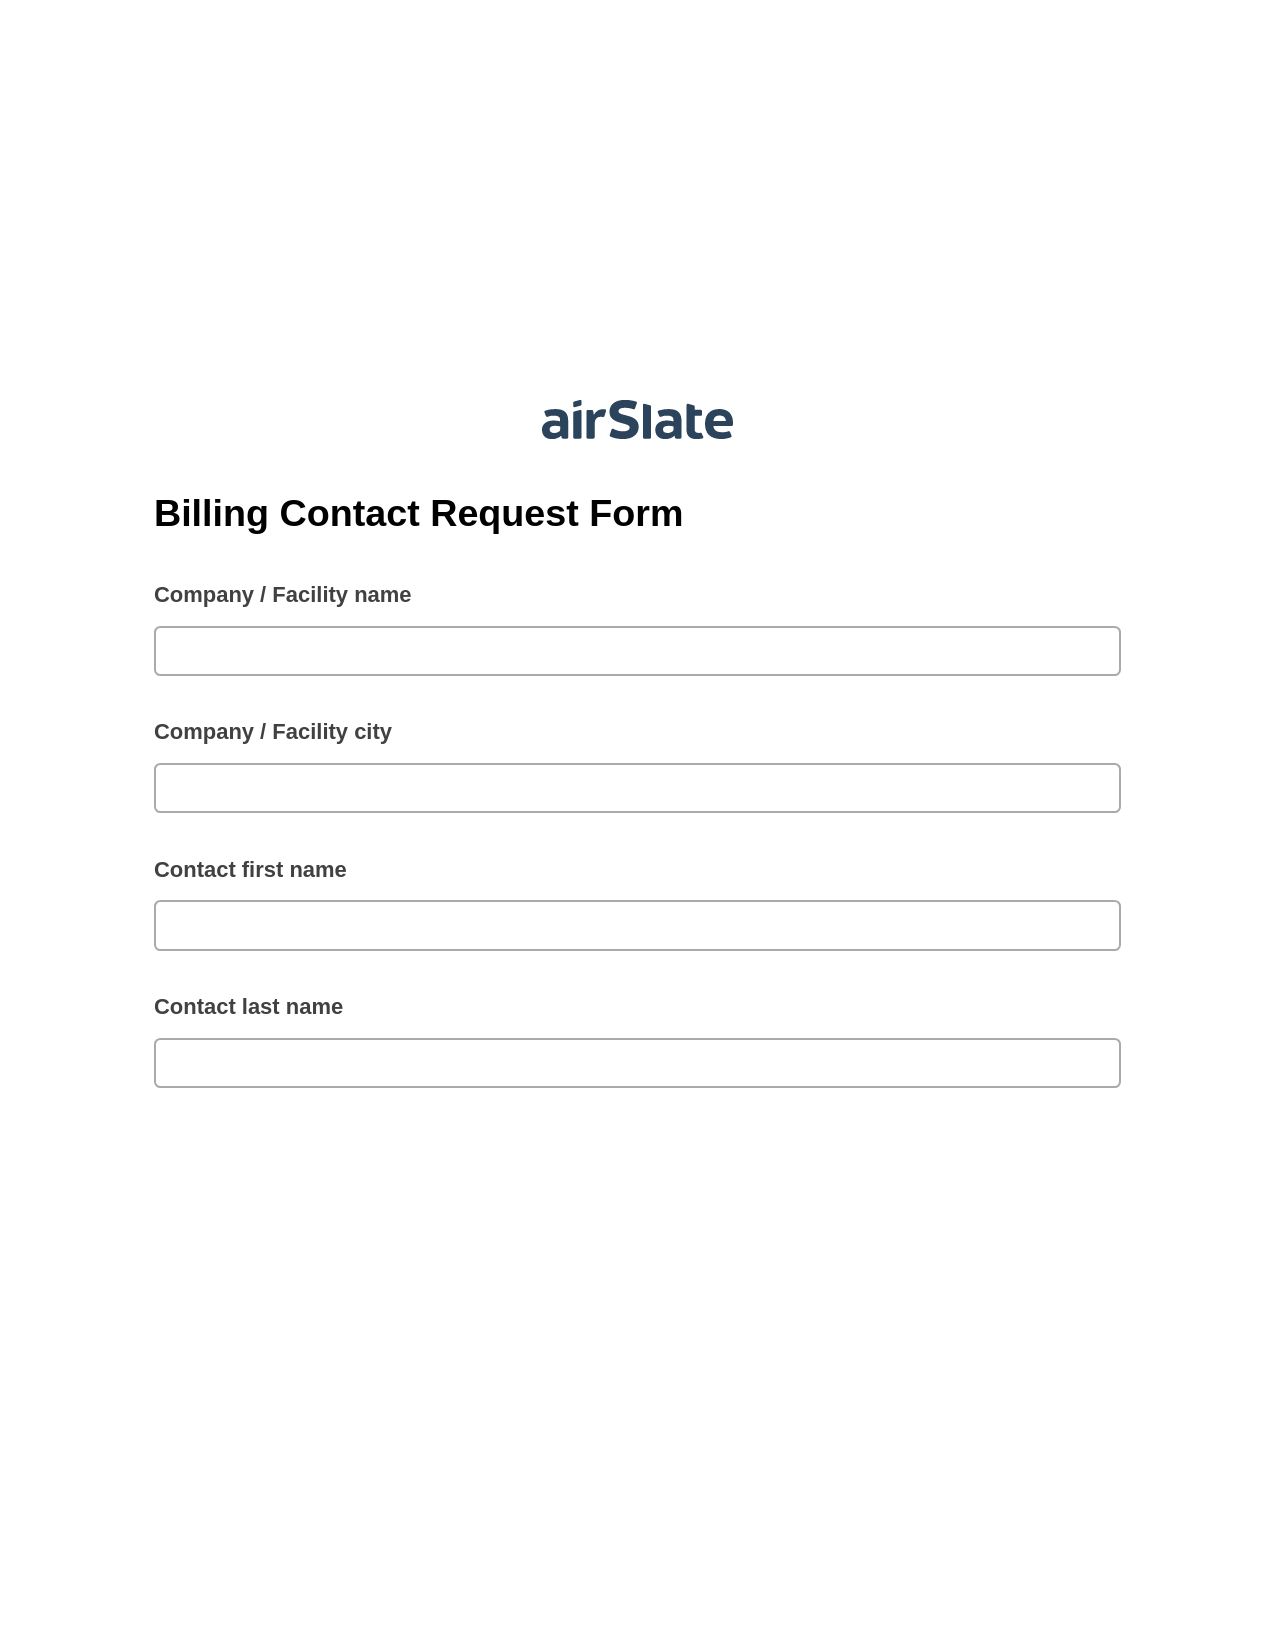 Billing Contact Request Form Pre-fill Slate from MS Dynamics 365 Records Bot, Reminder Bot, OneDrive Bot